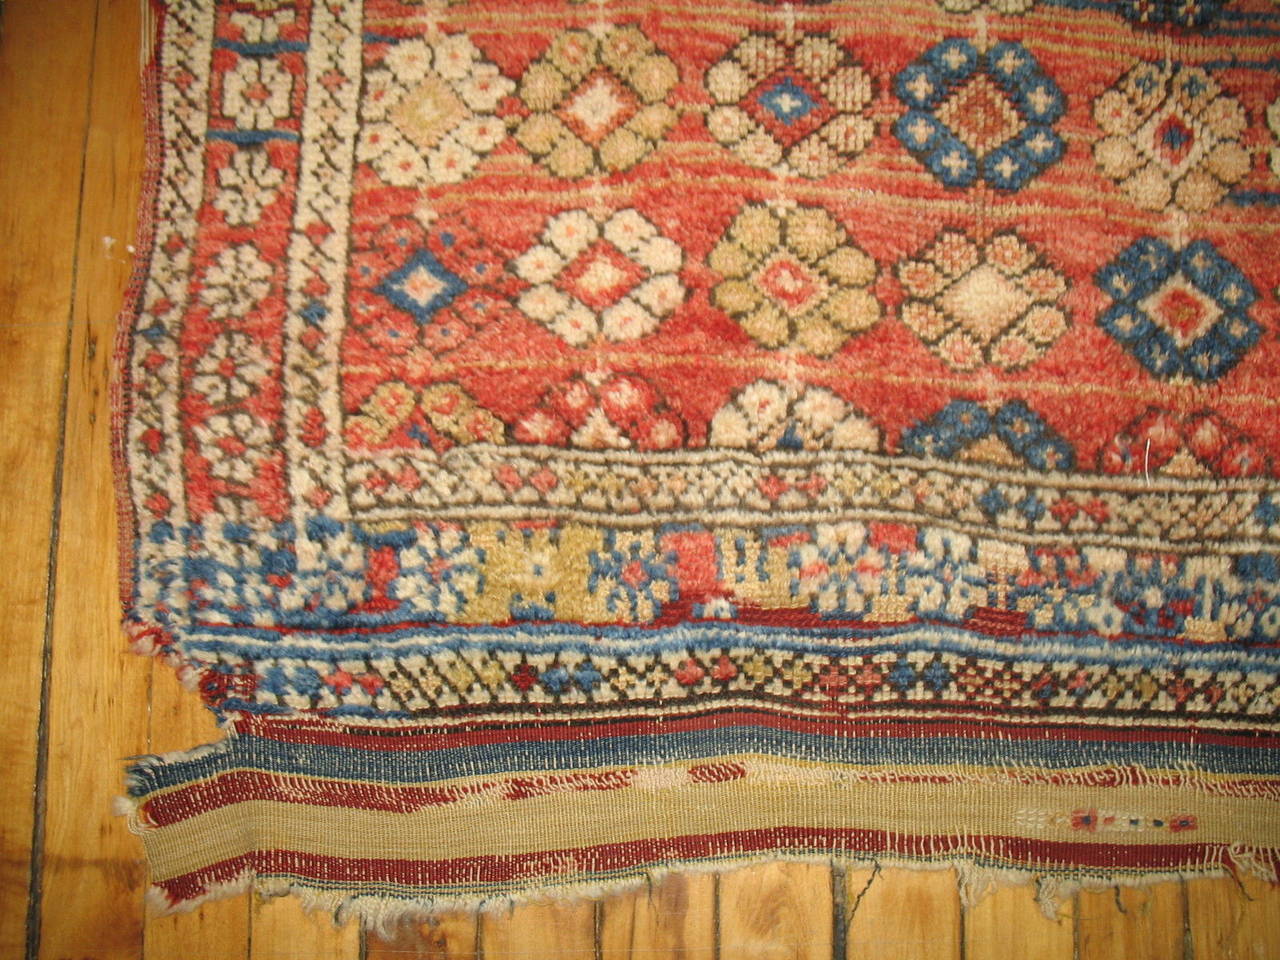 Bergama carpet are handwoven Turkish carpets, made in the Bergama district in the Izmir province of northwest Turkey. As a market place for the surrounding villages, the name of Bergama is used as a trade name to define the provenience.

The